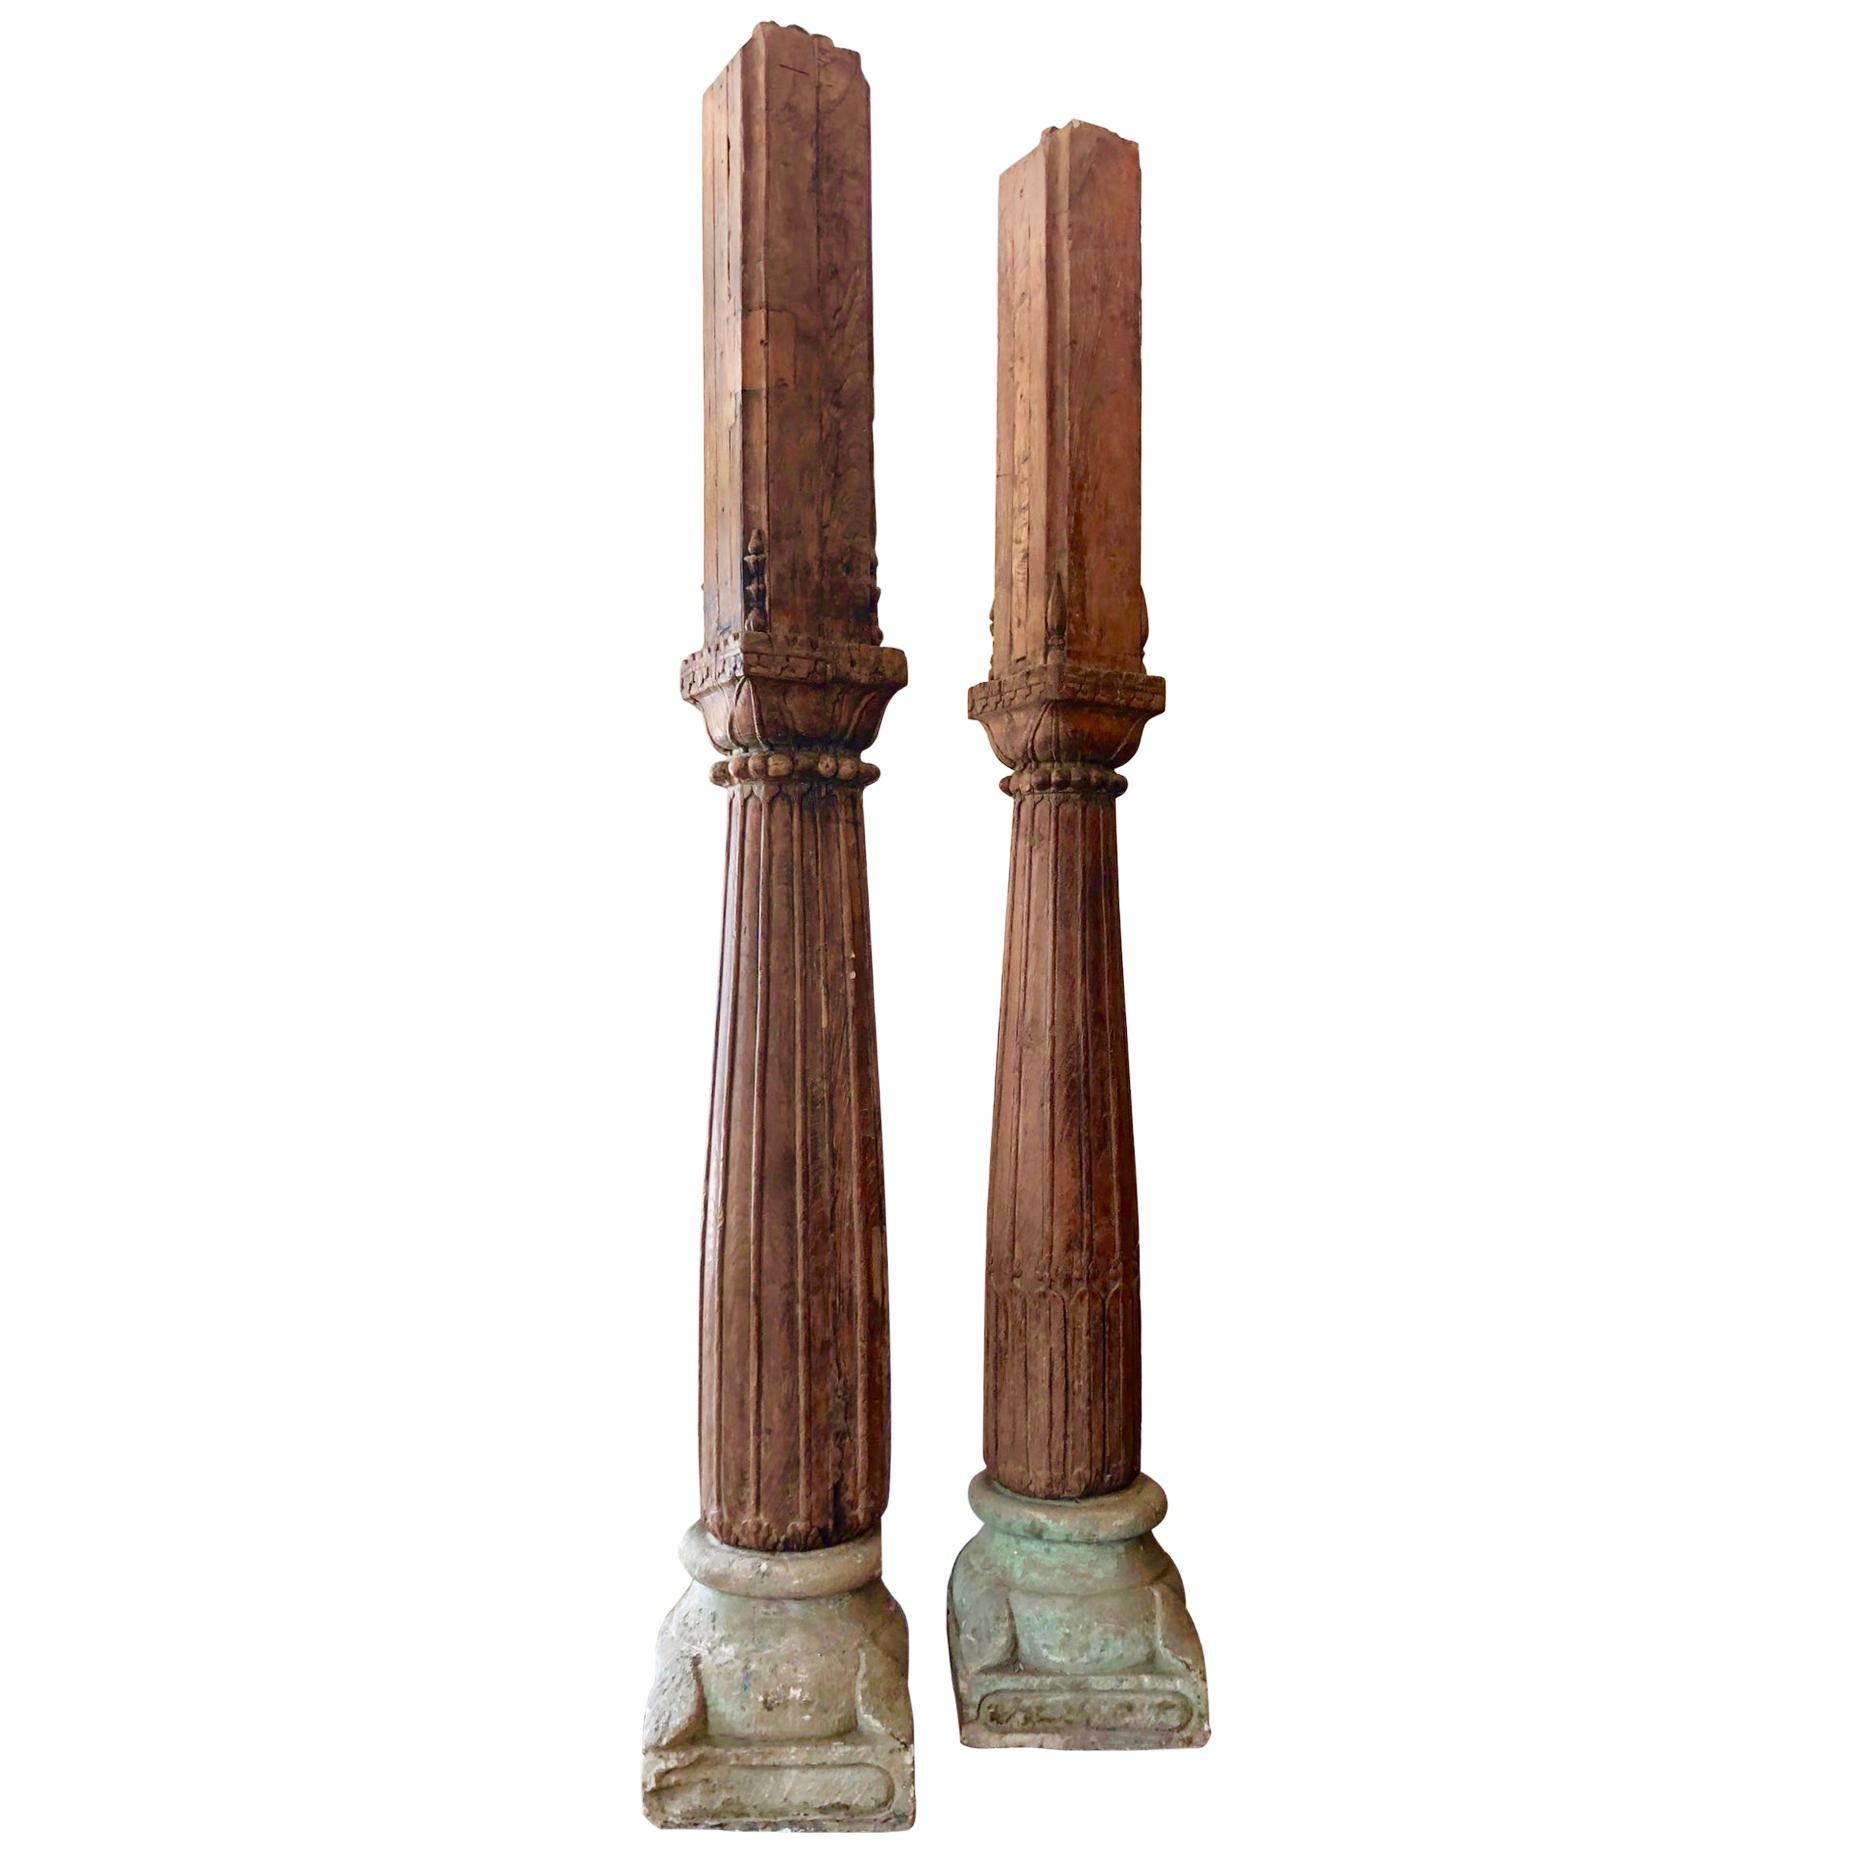 Pair of Large Antique Wood Columns with Stone Bases